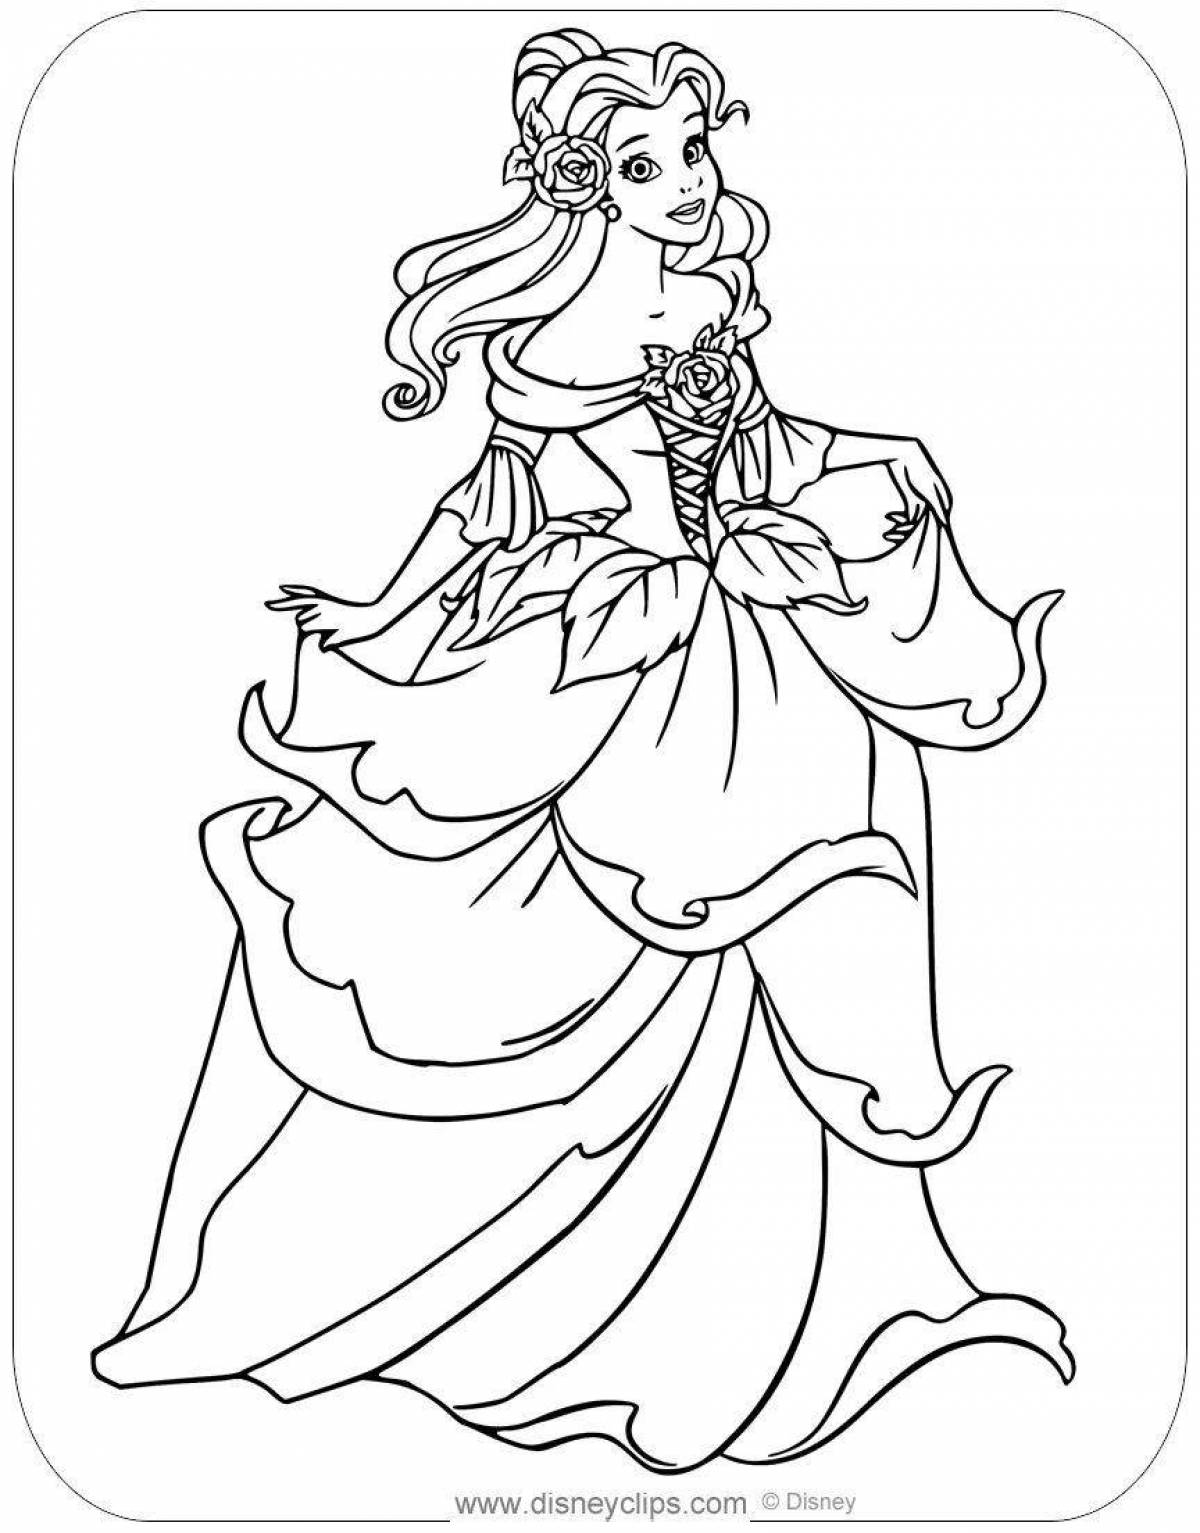 Princess coloring pages new